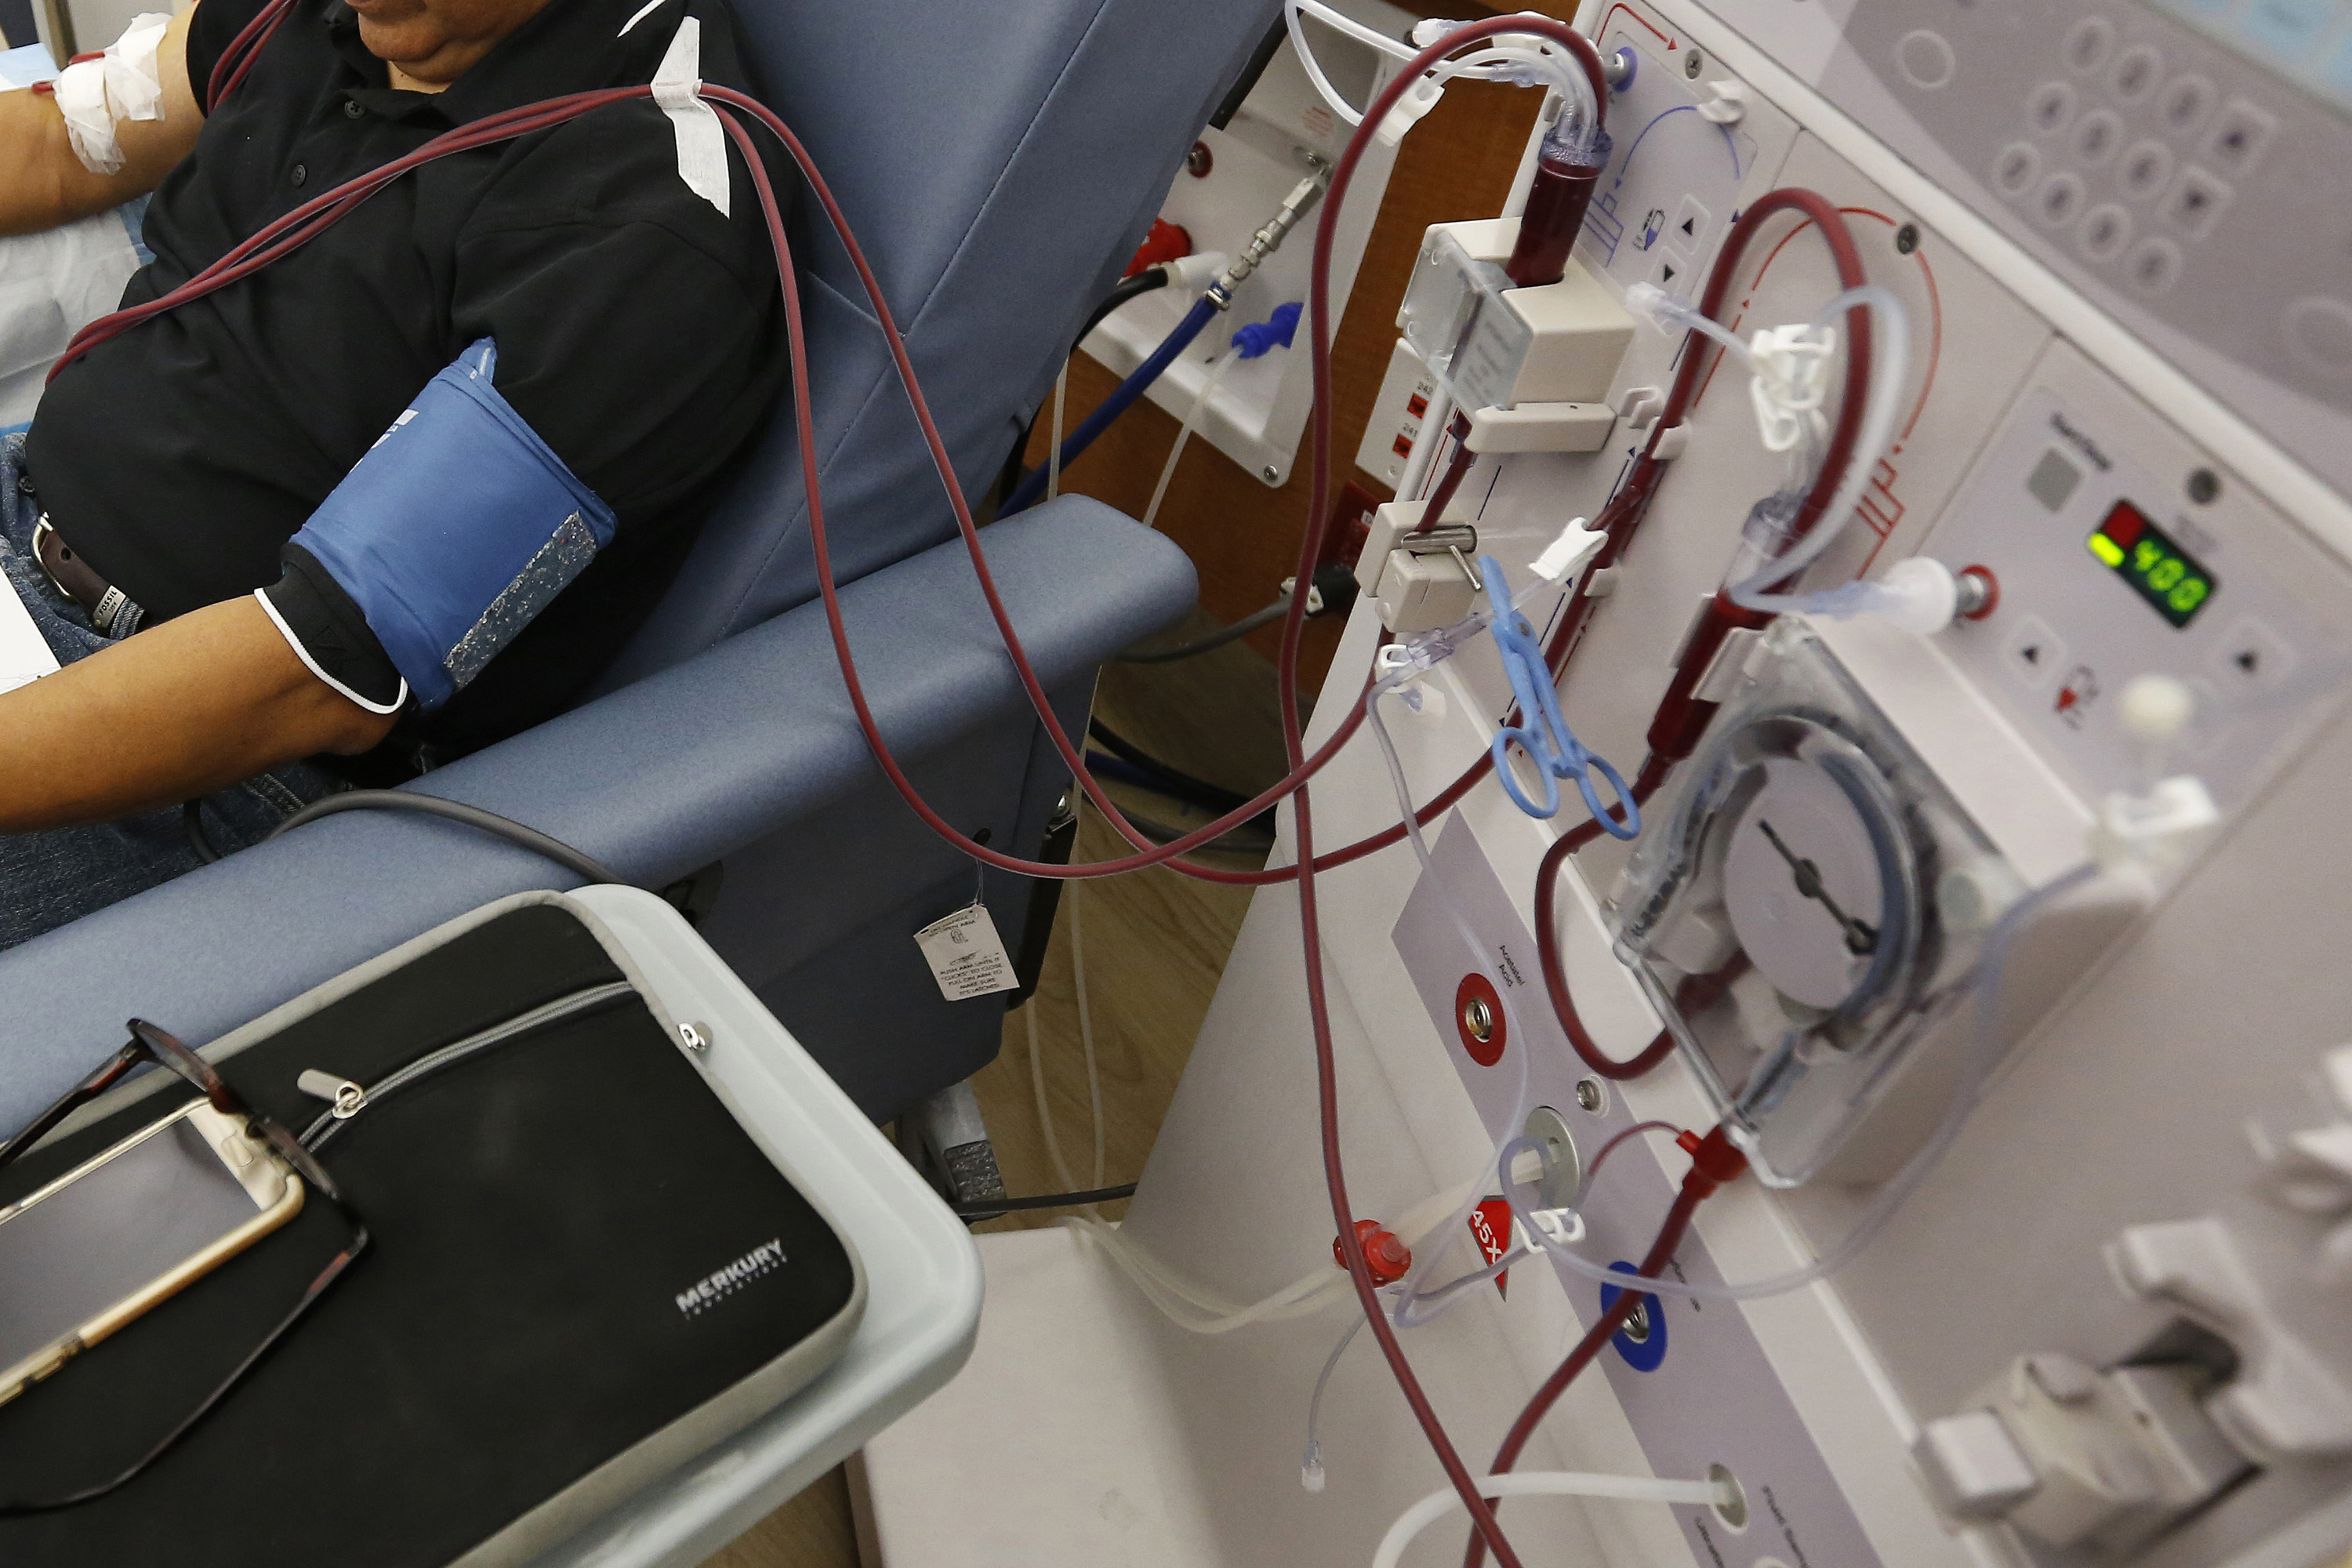  Expanded PhilHealth coverage of dialysis under review